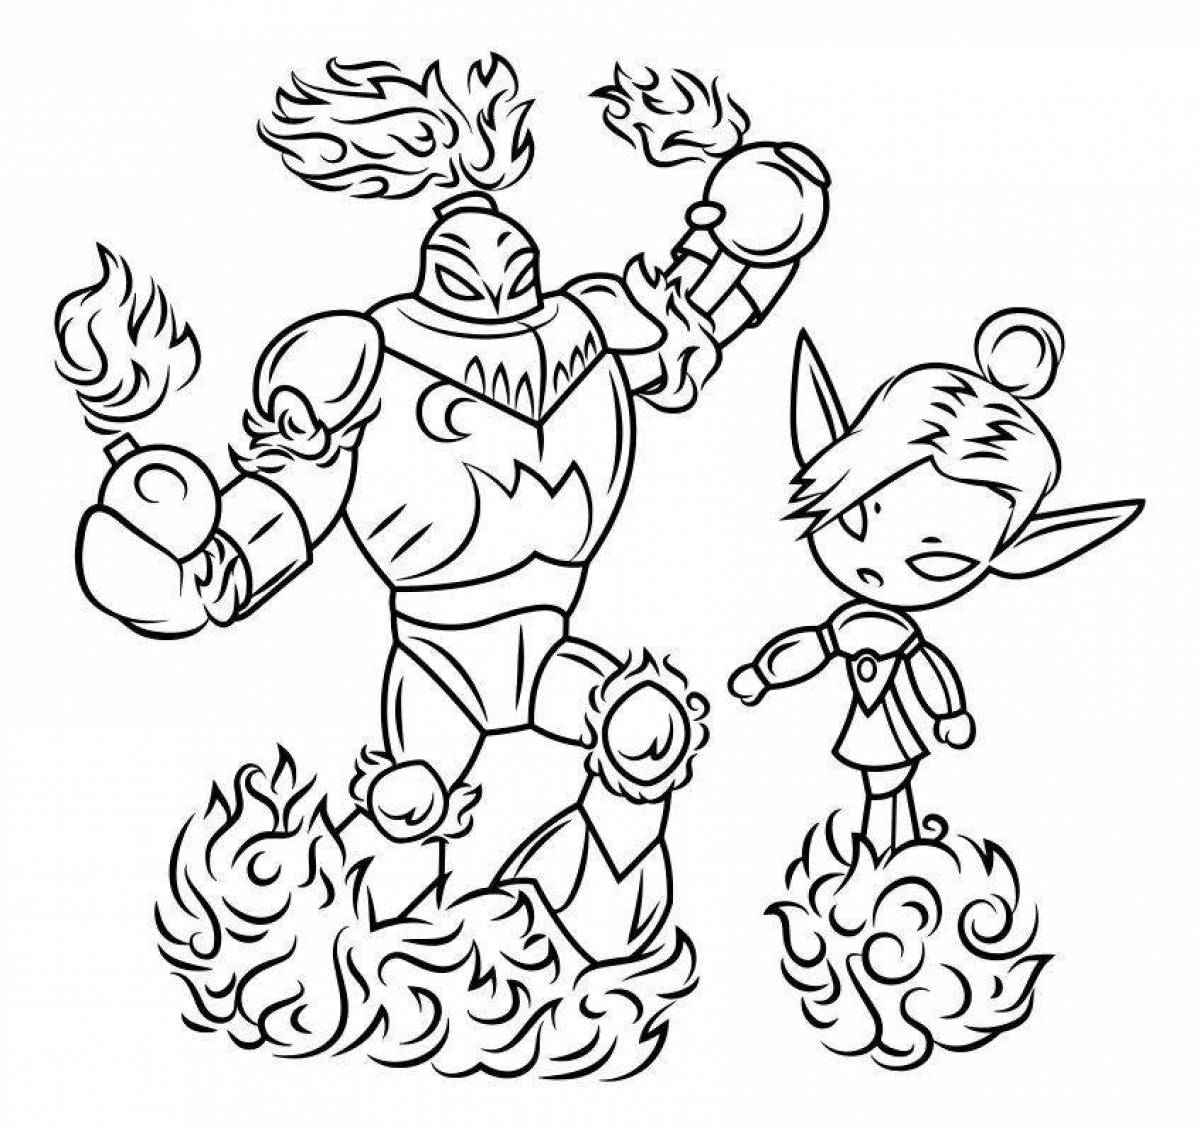 Cute mini force coloring page